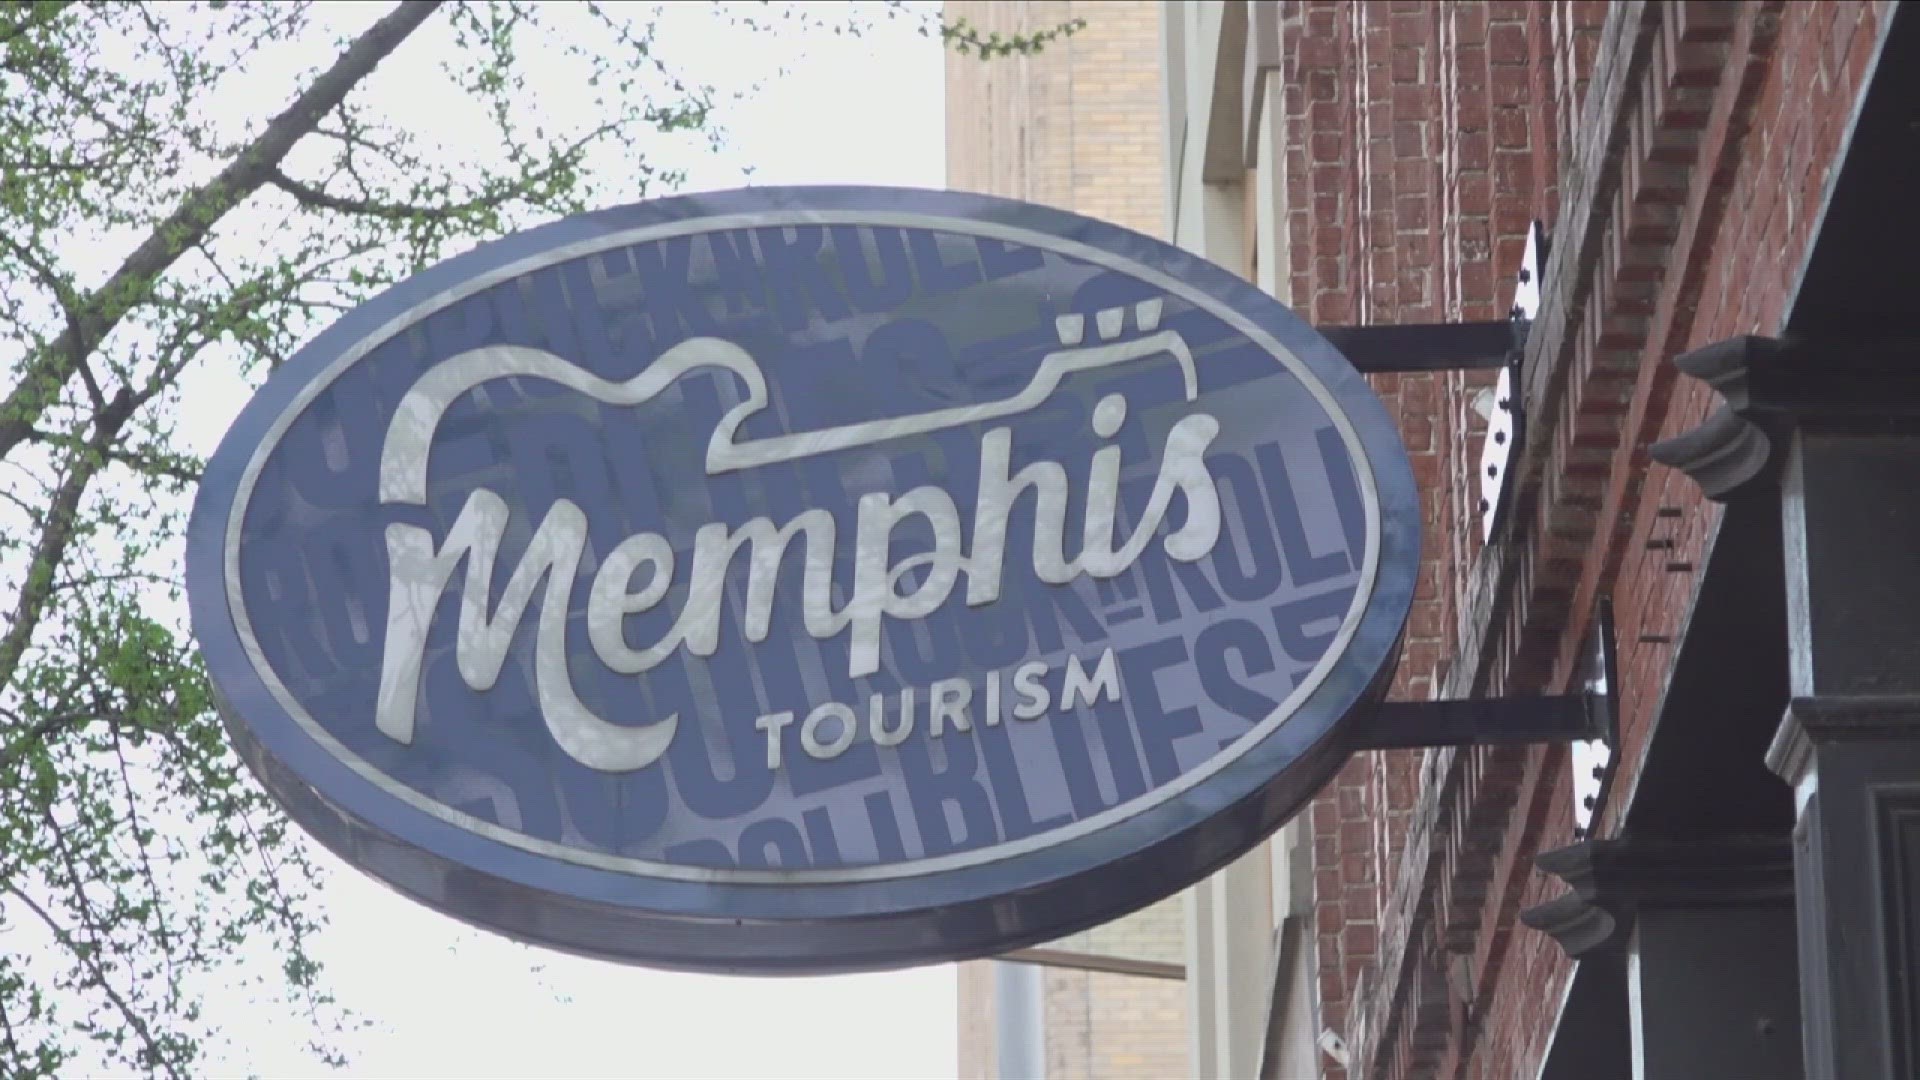 Soon, the first round of the NCAA Men's Basketball Tournament will tip off in Memphis, bringing a massive boost to local businesses.